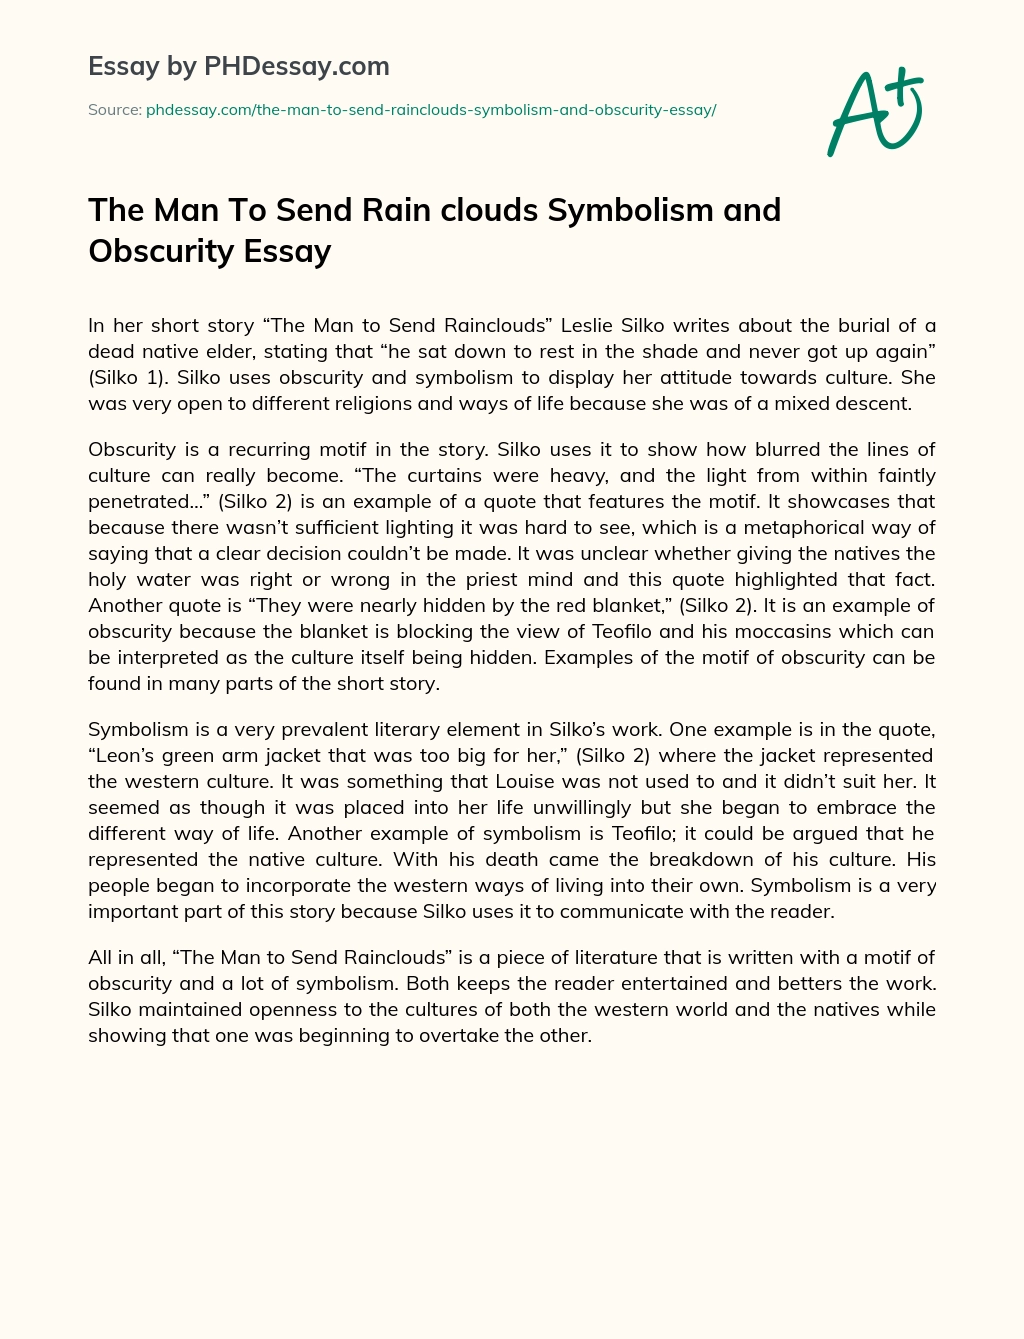 The Man To Send Rain clouds Symbolism and Obscurity Essay essay